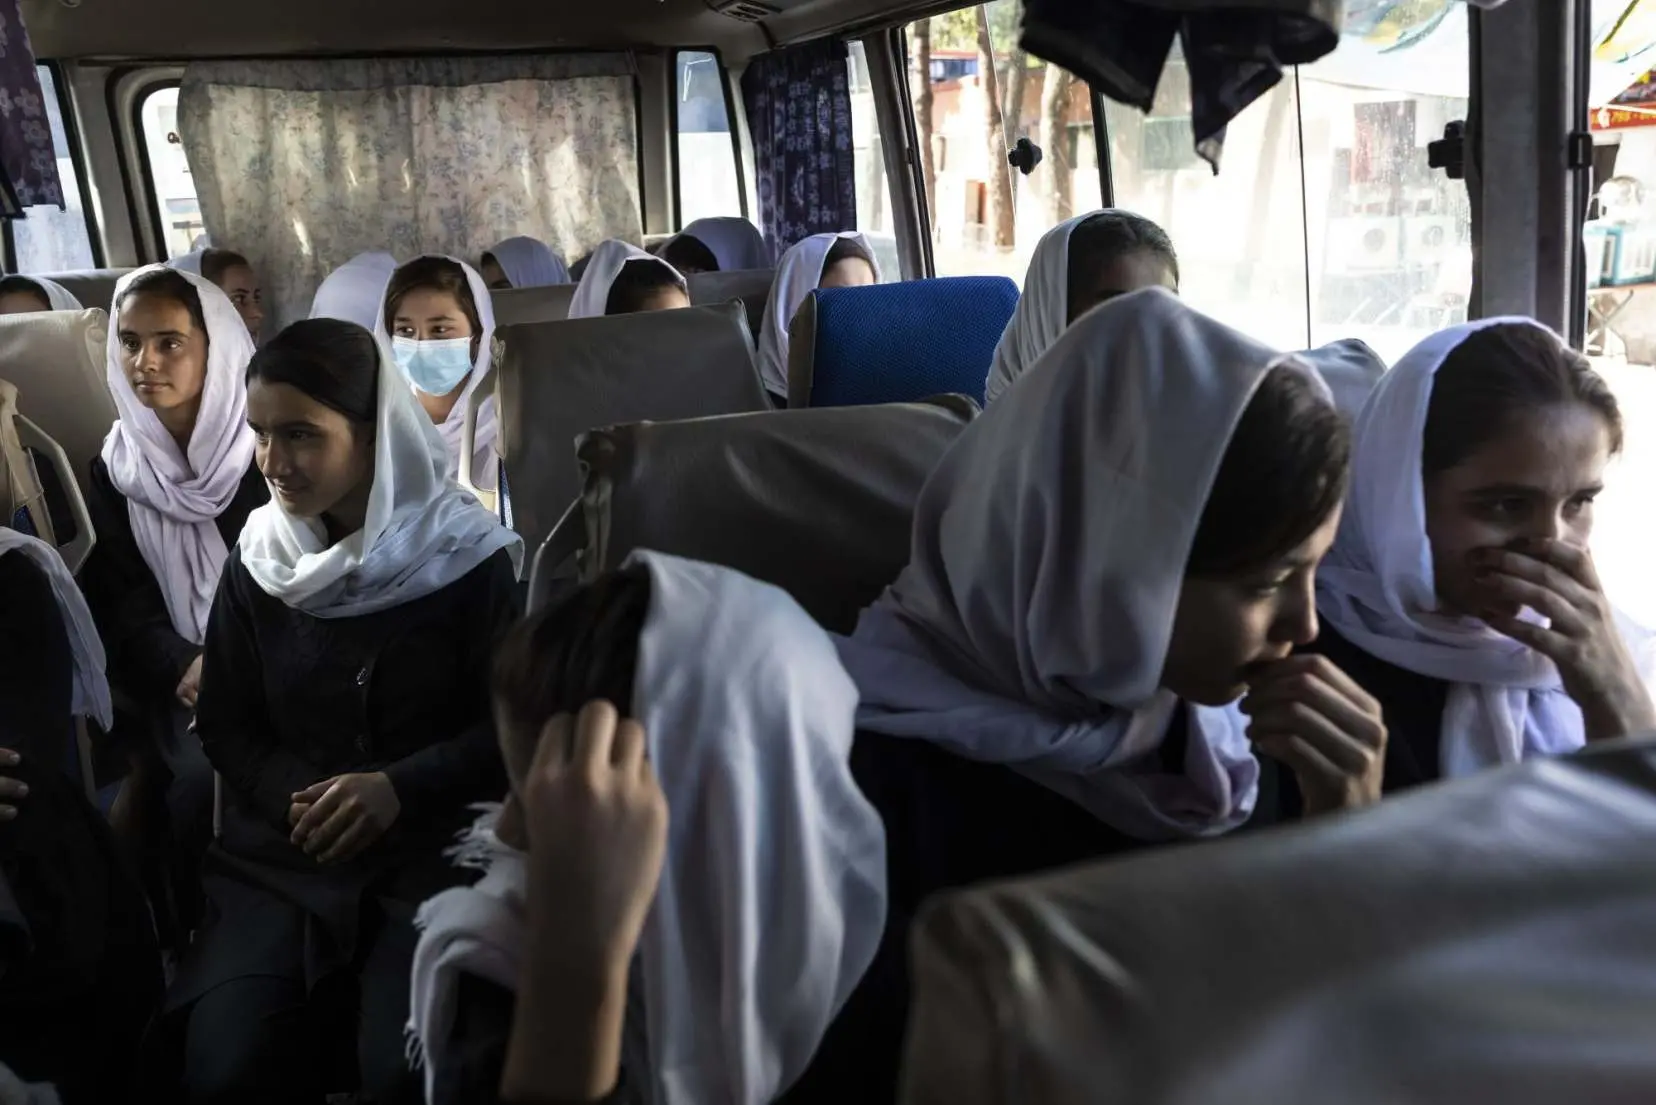 Girls sit together on a bus